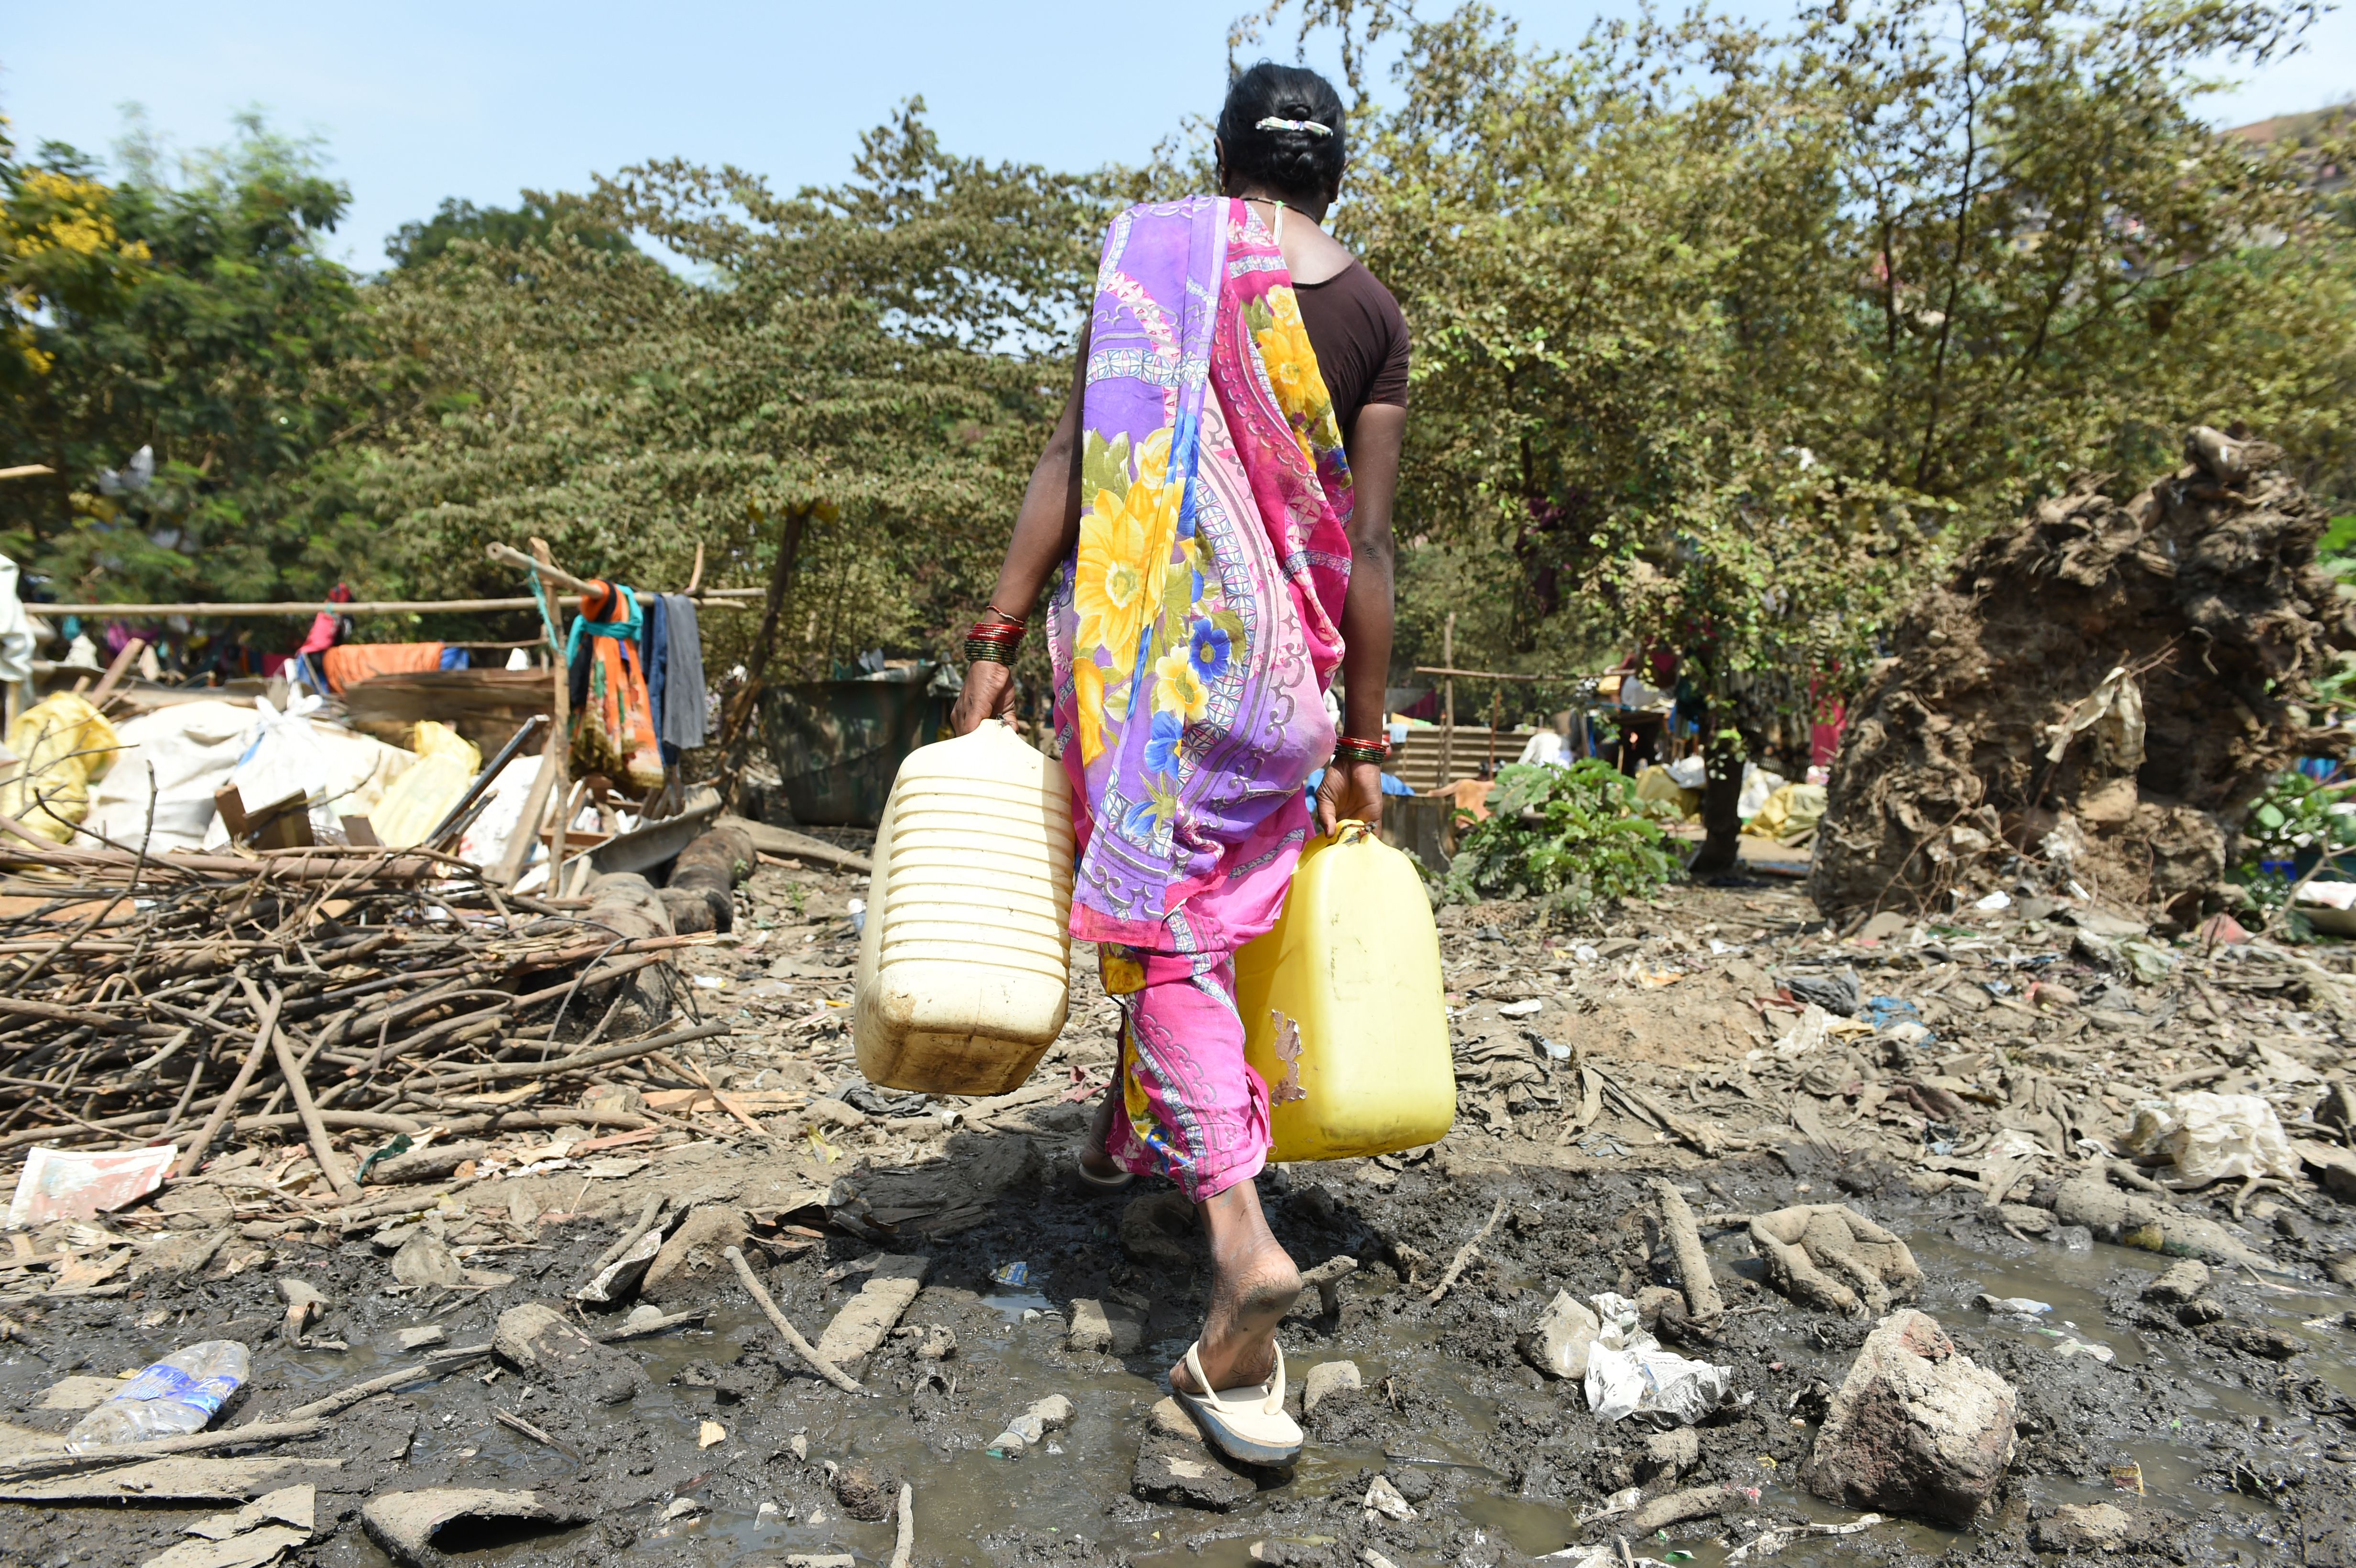 File photo: A woman carries containers filled with drinking water in Maharashtra. Frequent droughts in the region are forcing people to leave their farms and work as labourers under unfair contracts